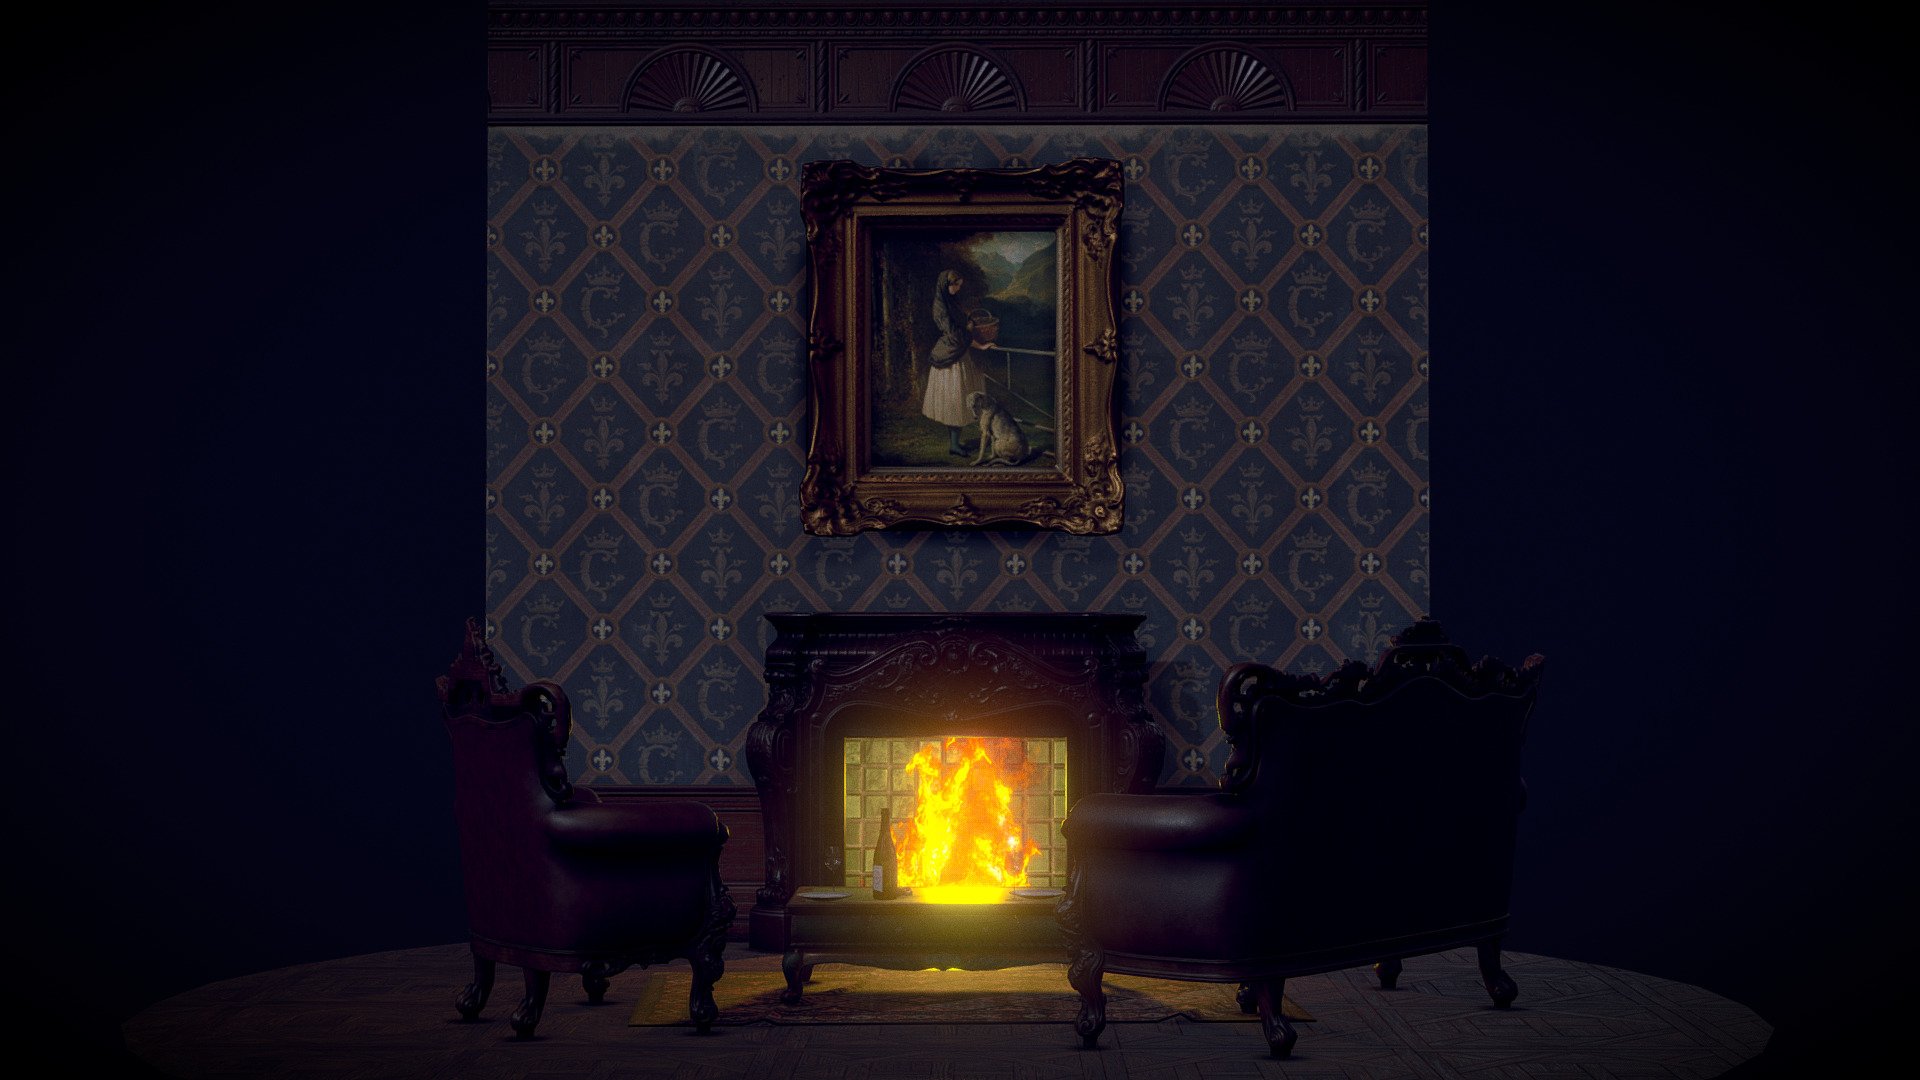 Part of a room in Baroque style, focused around the fireplace.
With small table, dishes and wine glass left on top of it.
The painting is &ldquo;A Scottish Girl